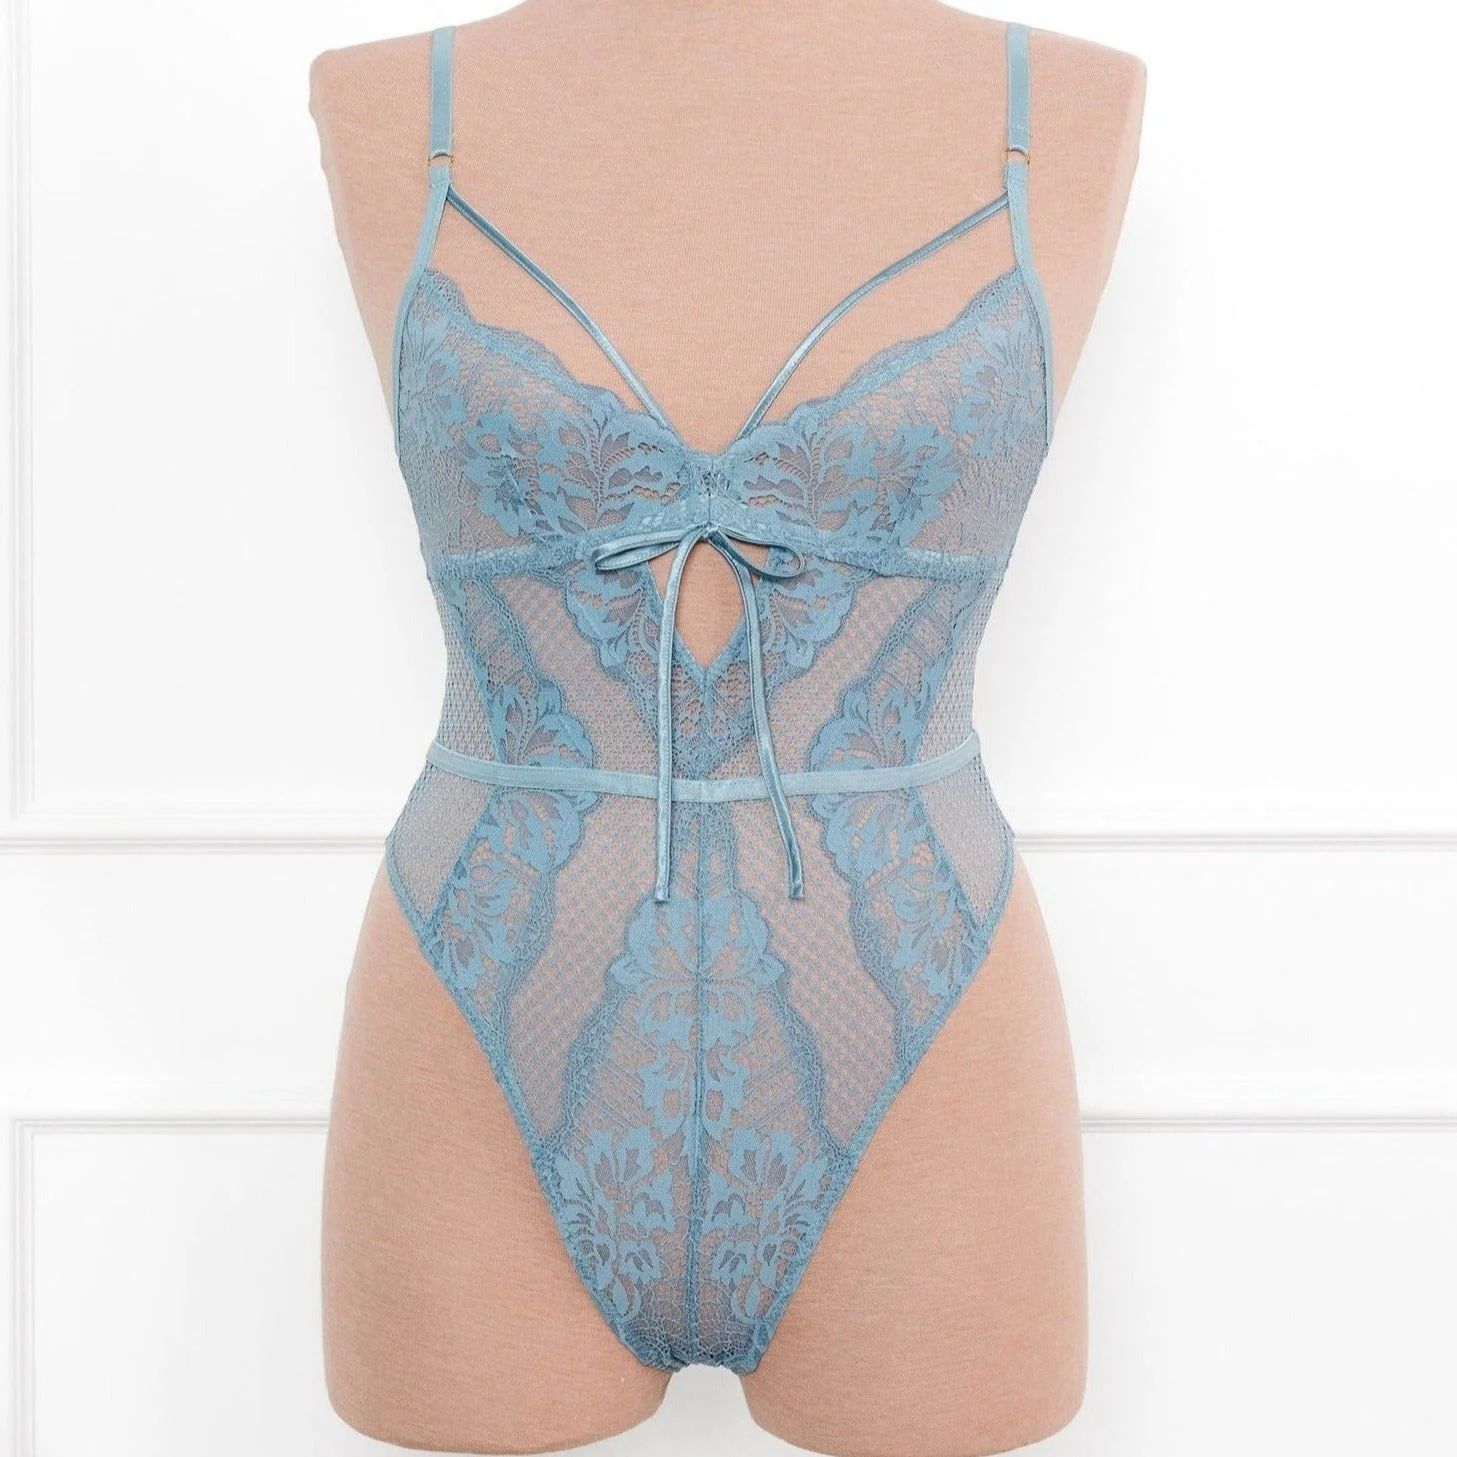 Lacy Caged Crotchless Teddy - Frost Blue | Mentionables